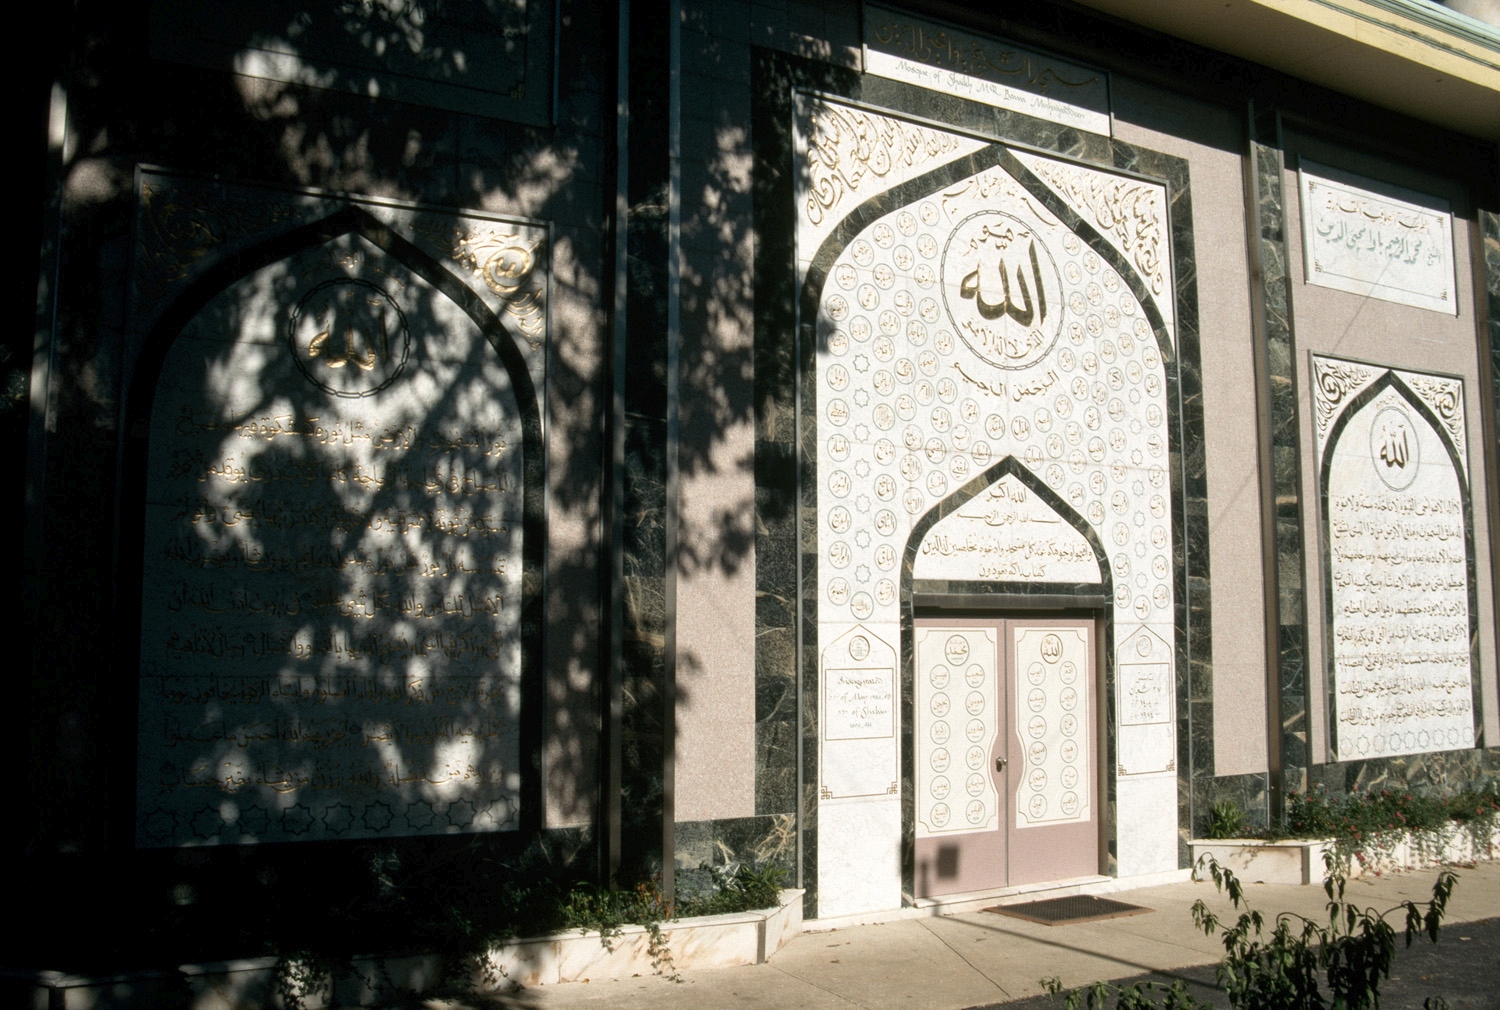 Detail of front facade, with main entrance and calligraphic panels